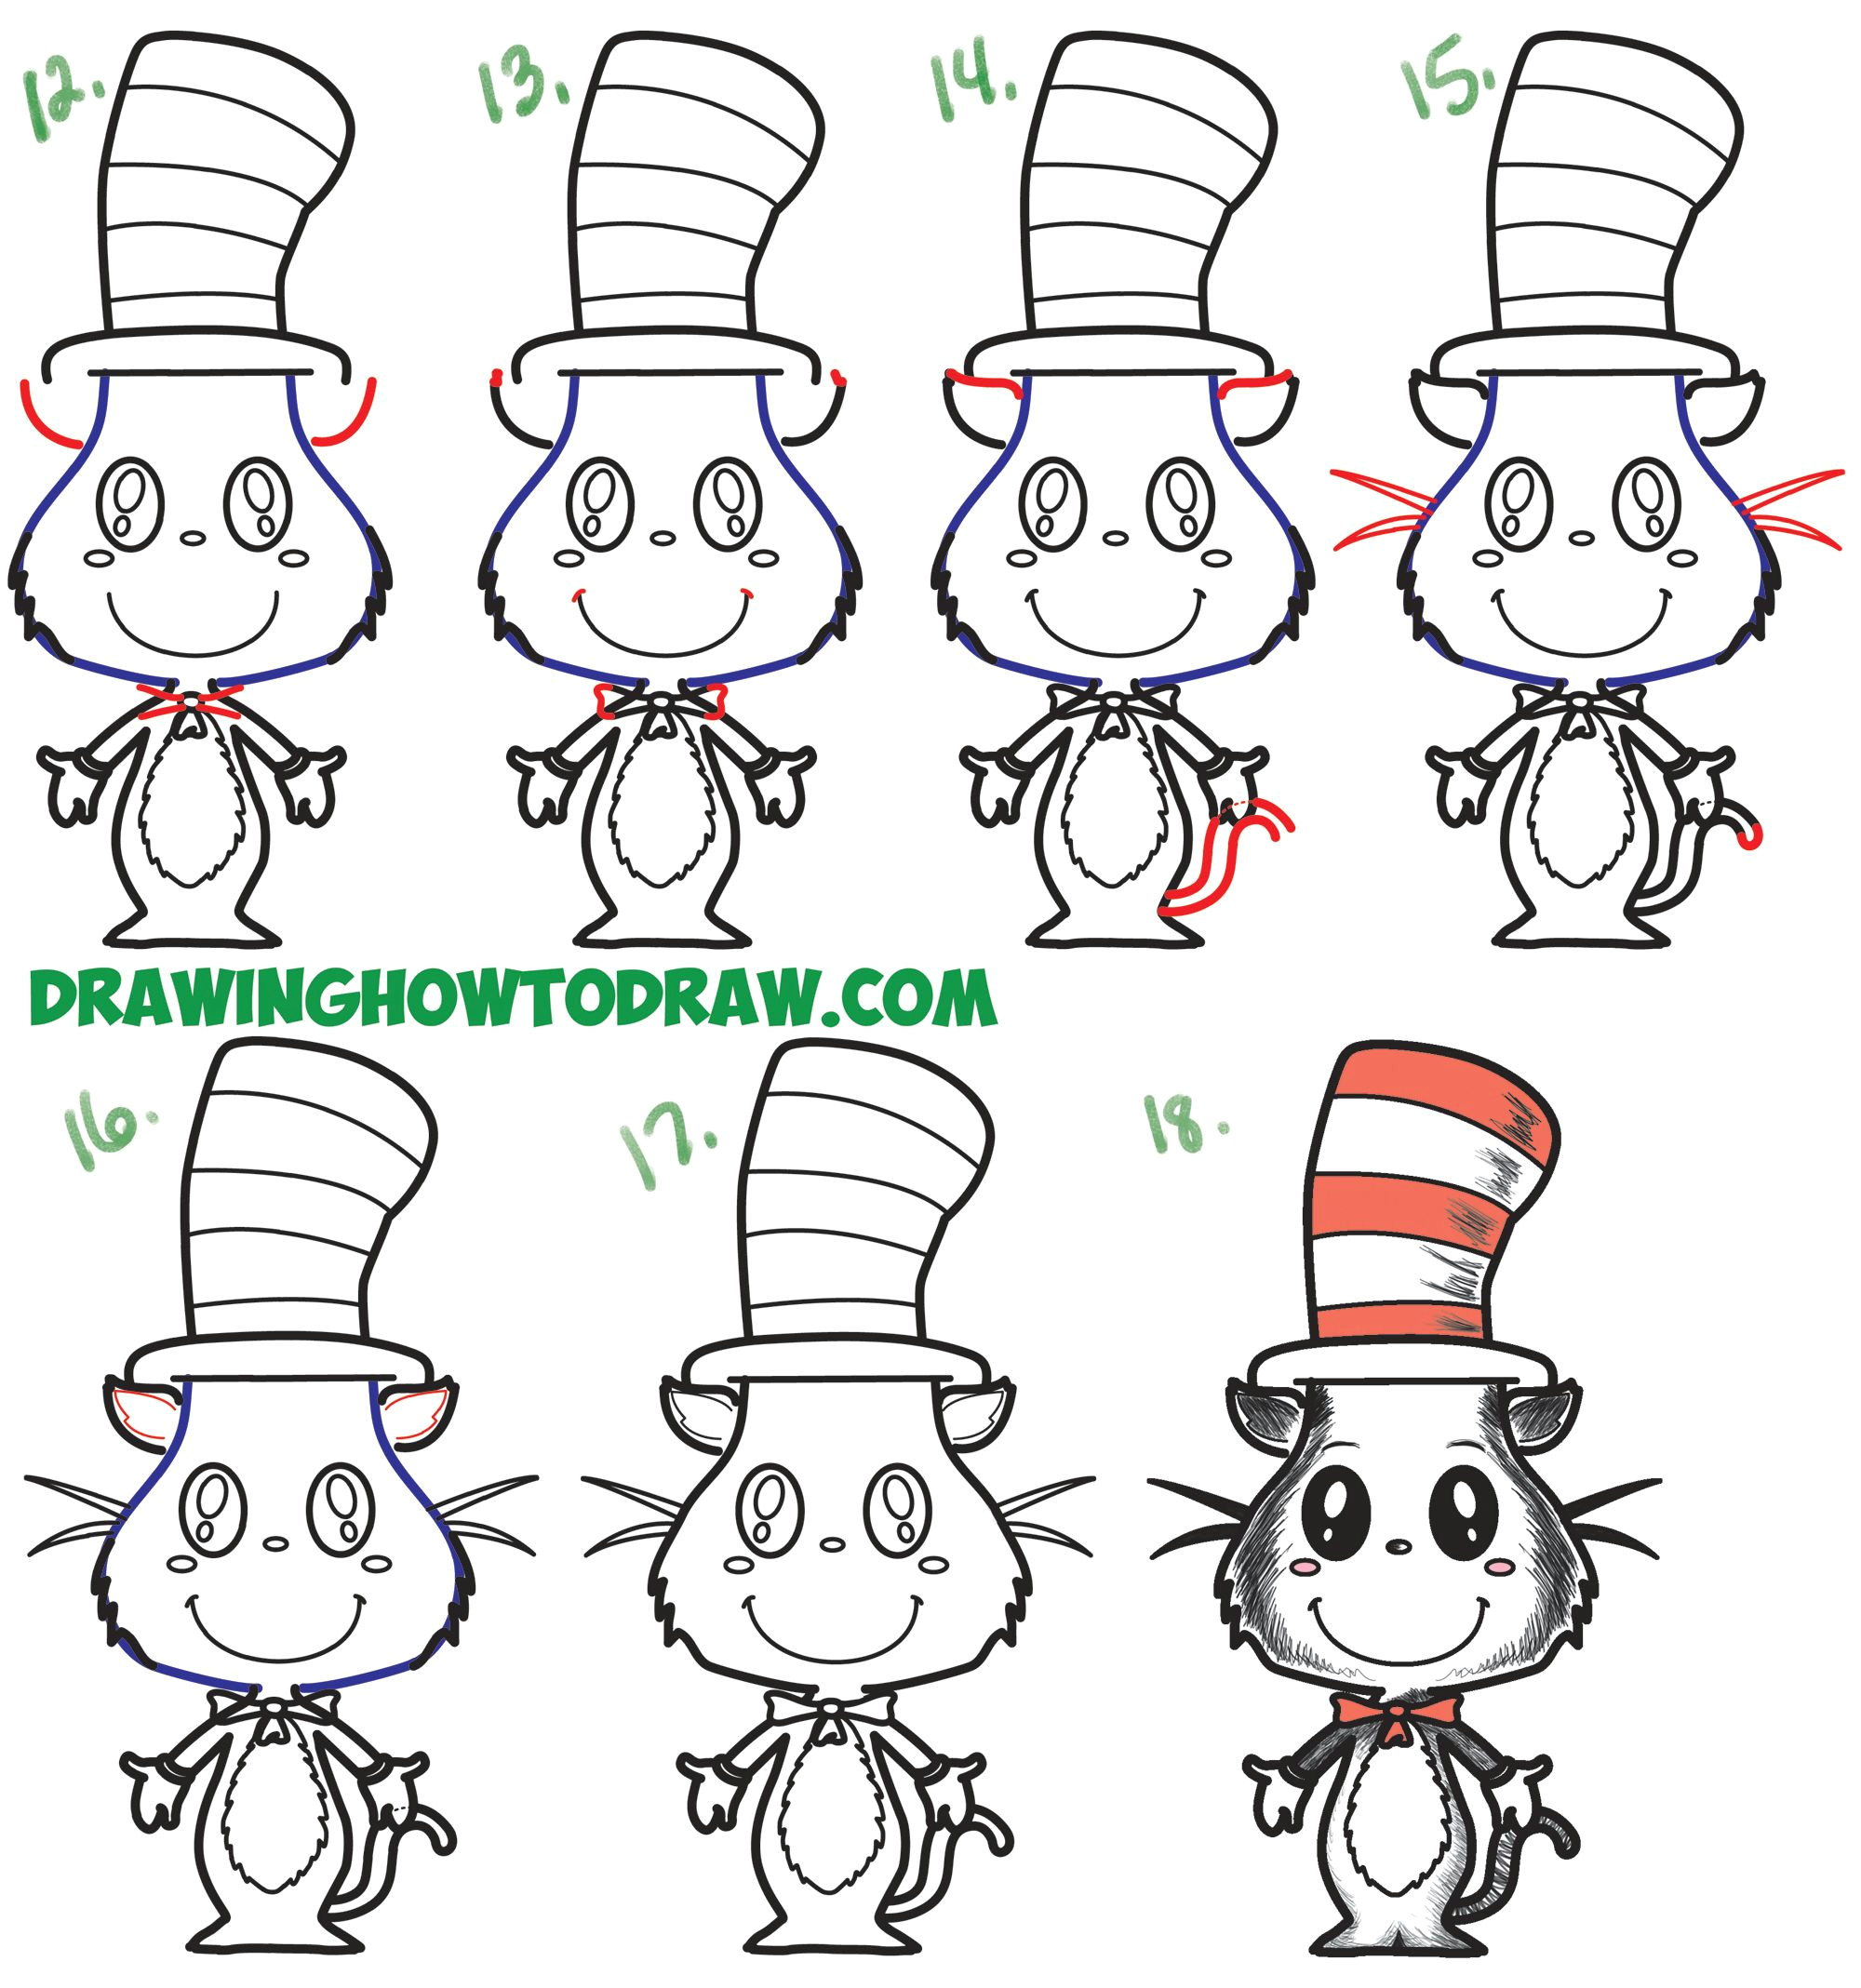 Drawing A Cat for Beginners How to Draw the Cat In the Hat Cute Kawaii Chibi Version Easy